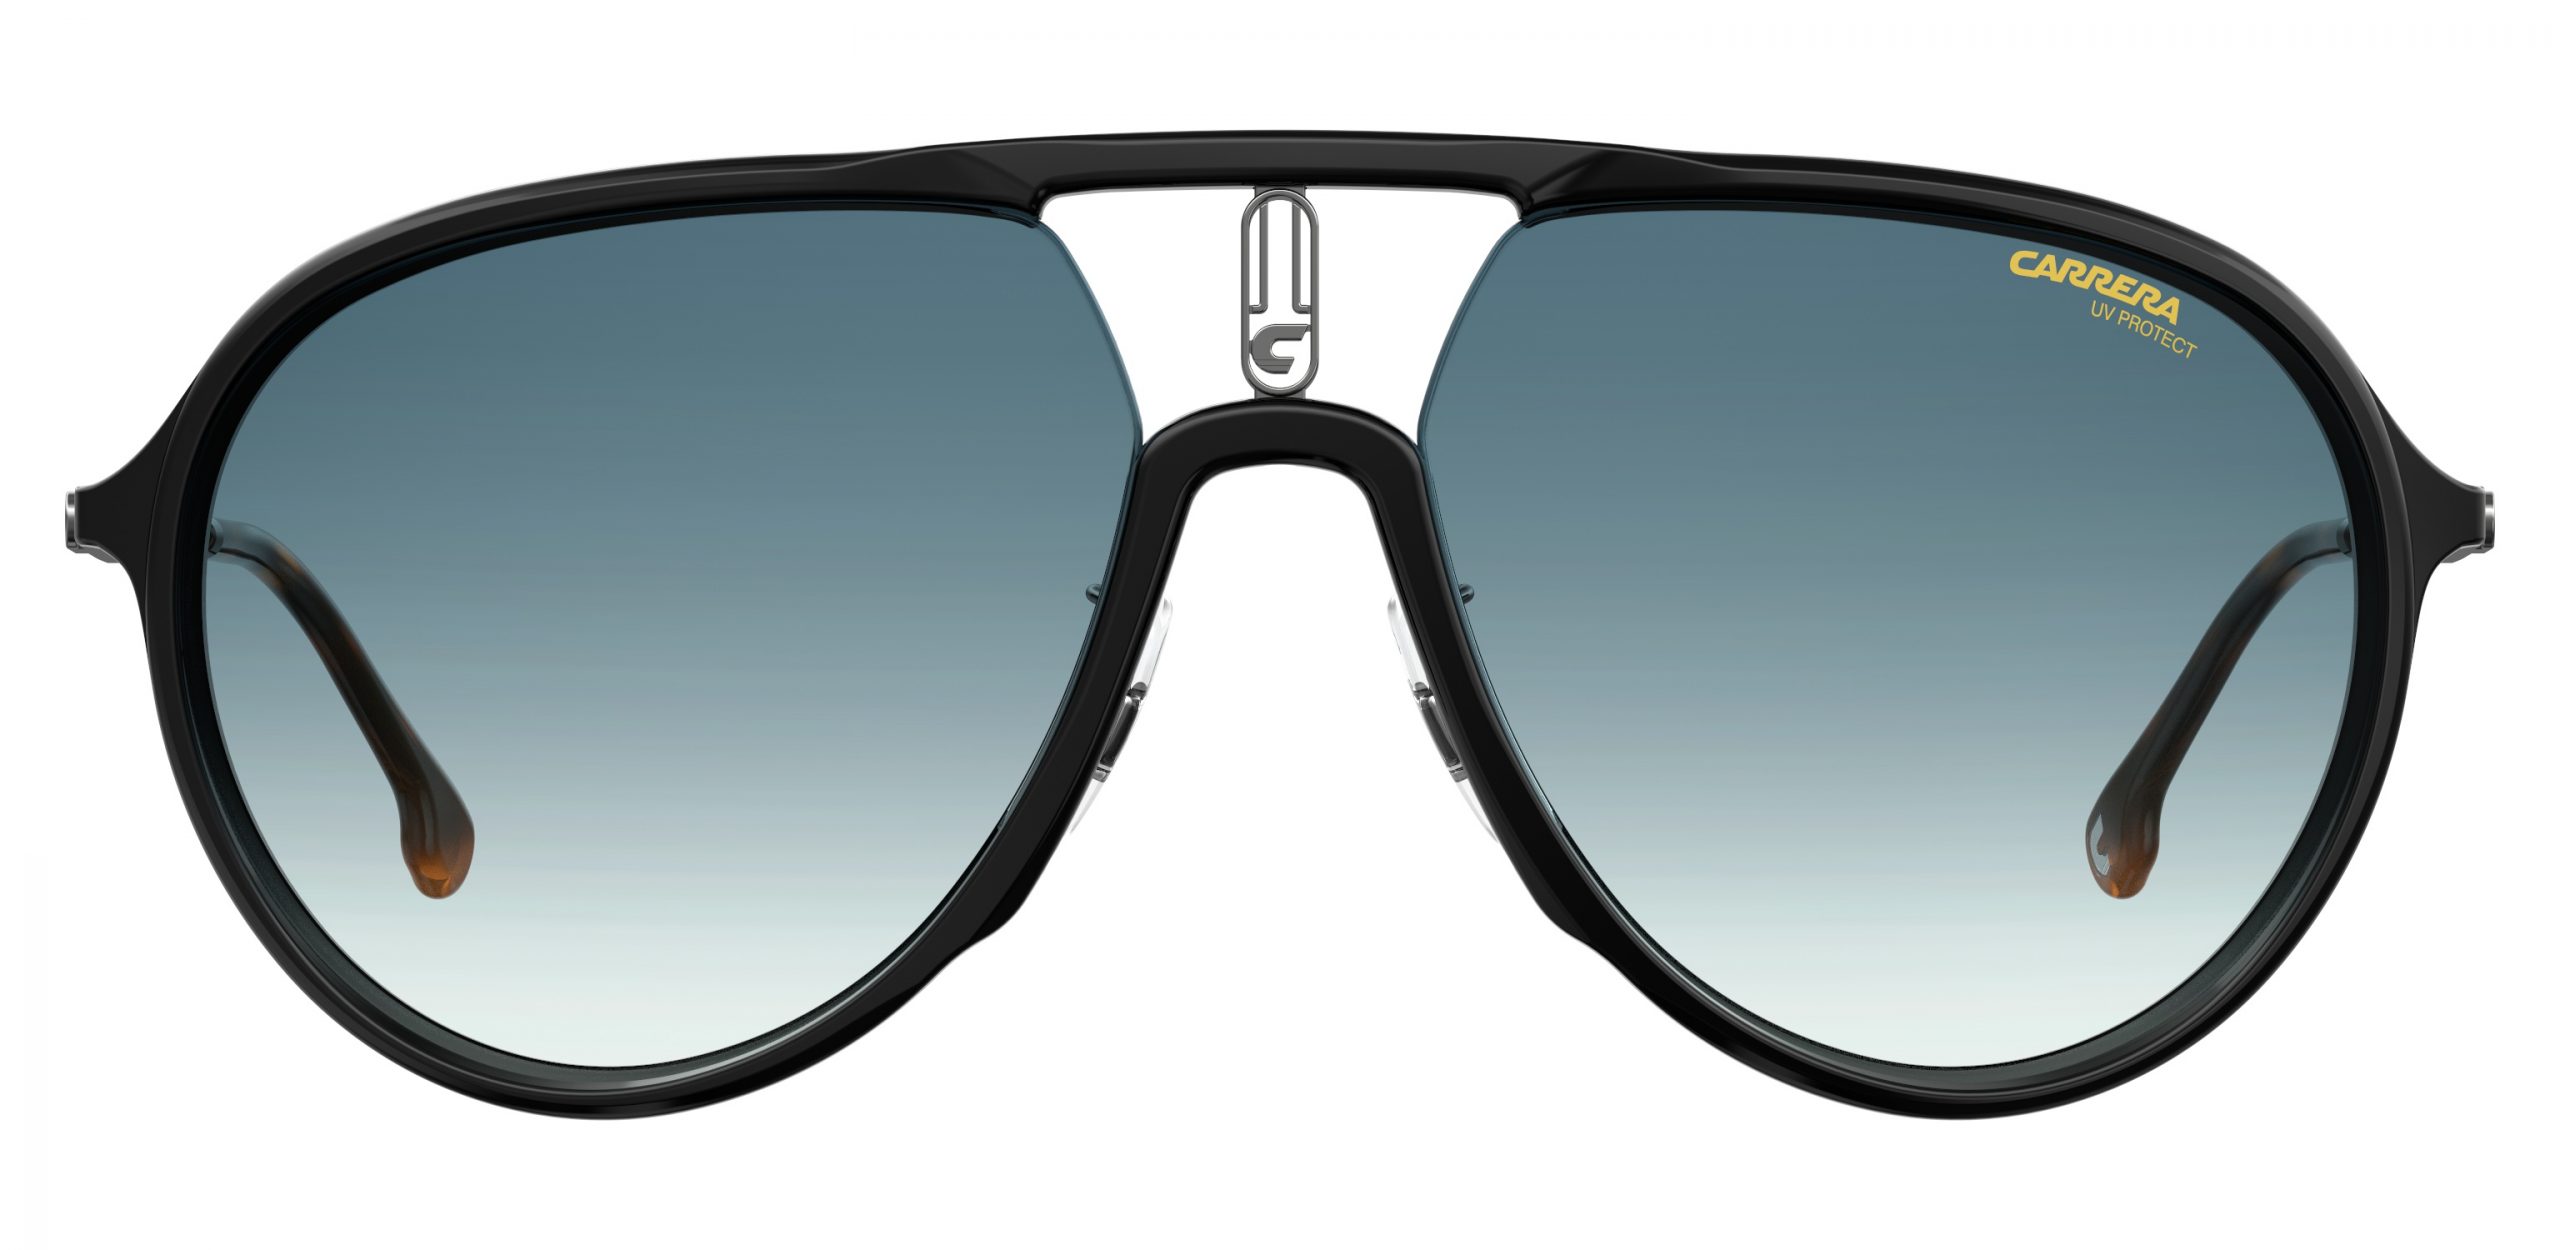 Carrera : Iconic Details That Stand Out | VisionPlus Magazine